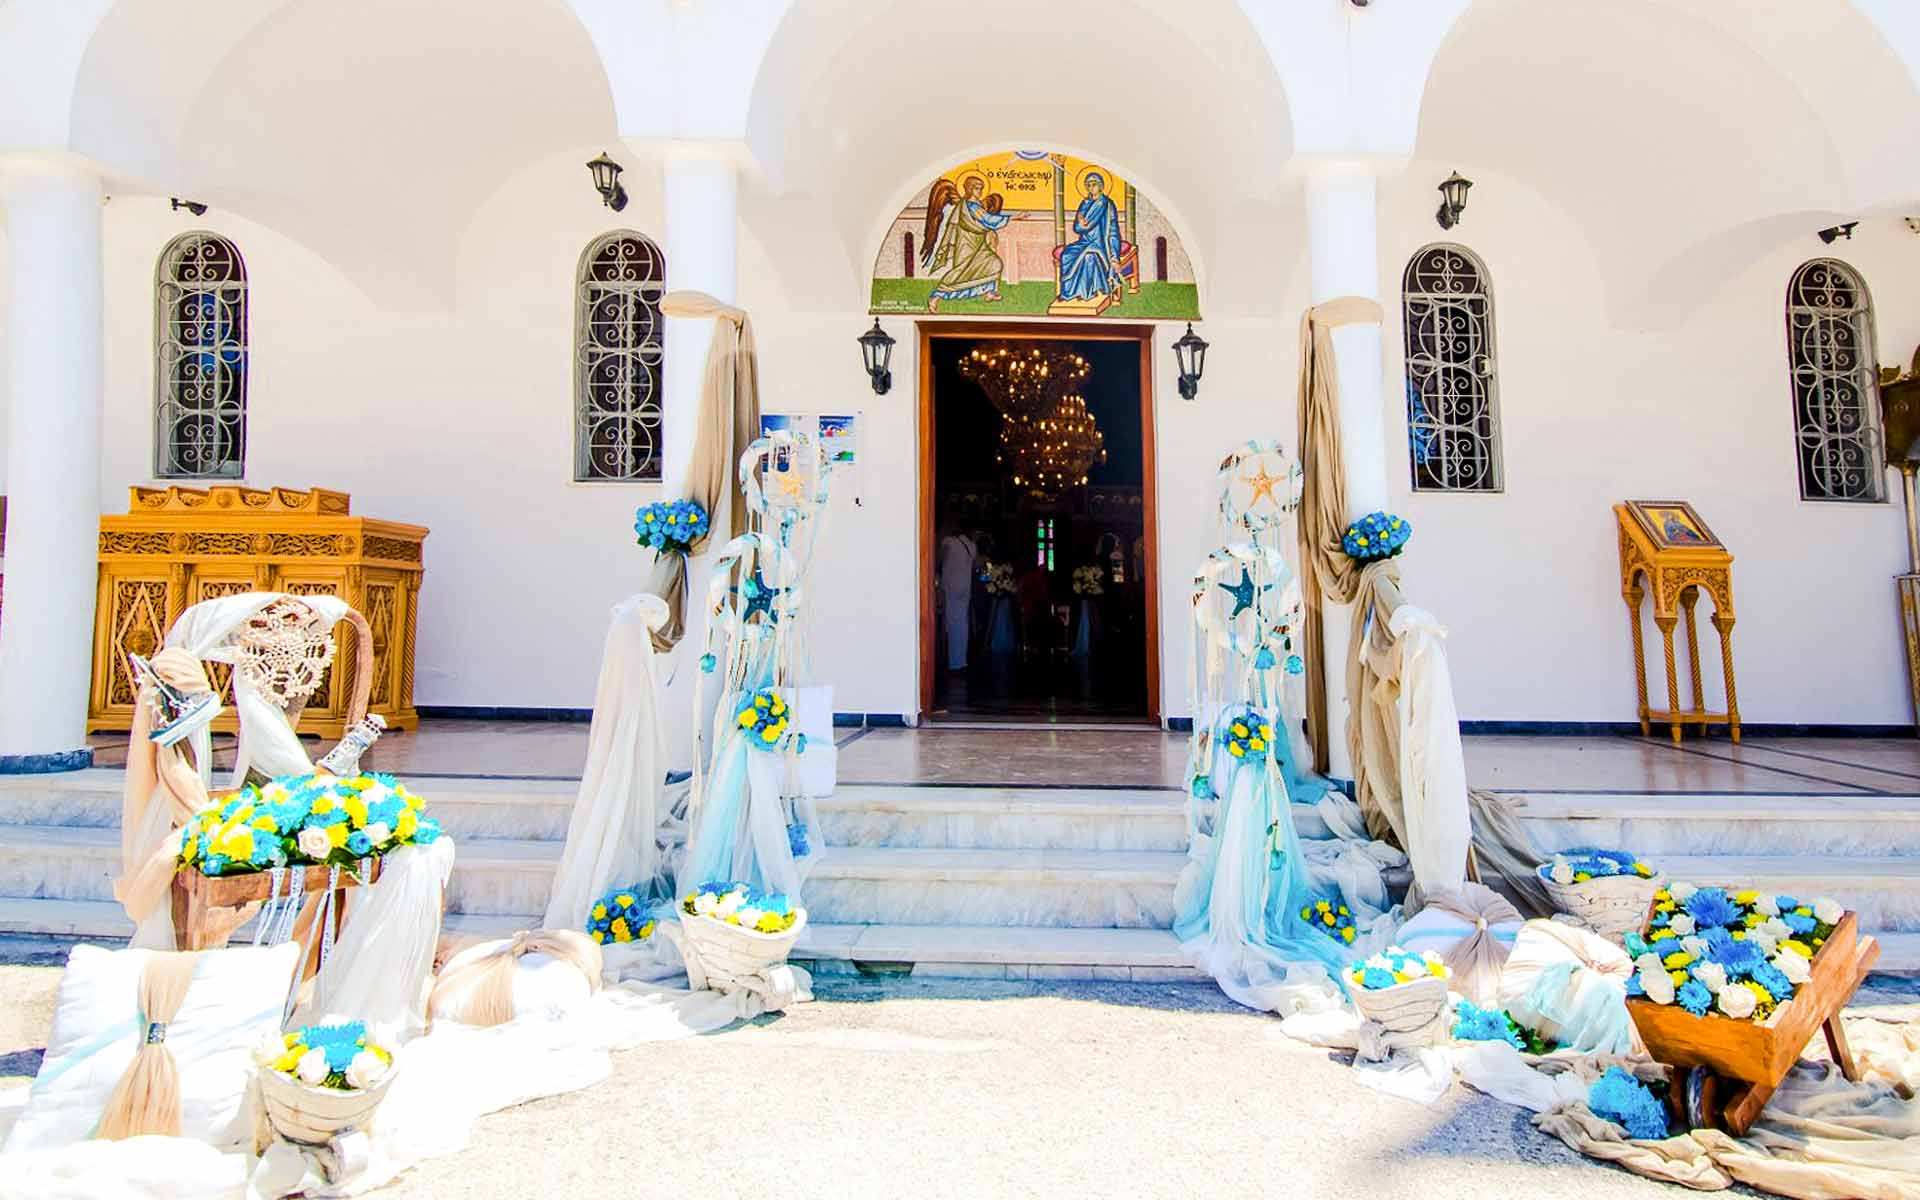 Entrance-To-Baptism-Decorated-In-Lavish-Flowers-And-Nautical-Fixtures